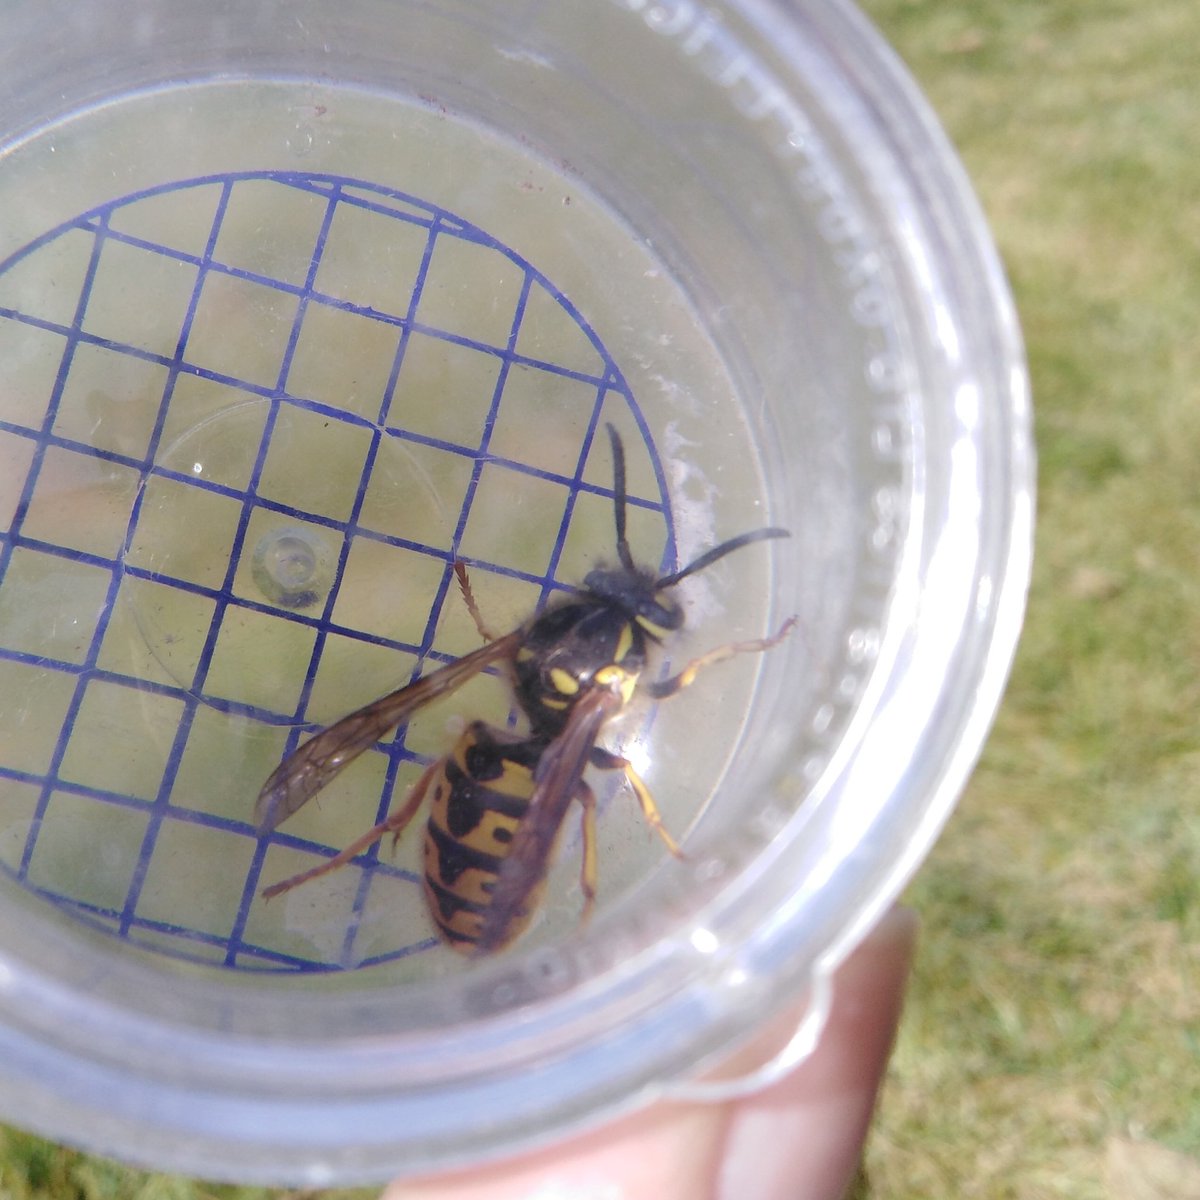 This wasp stayed still enough that I didn't need to pop her in fridge to calm down to let me to ID her. She's another German Wasp, Vespula germanica. Not same one as yesterday as she's different facial markings. #germanwasp  #vespulagermanica  #wasp  #wasps  #socialwasp  #waspsarecool